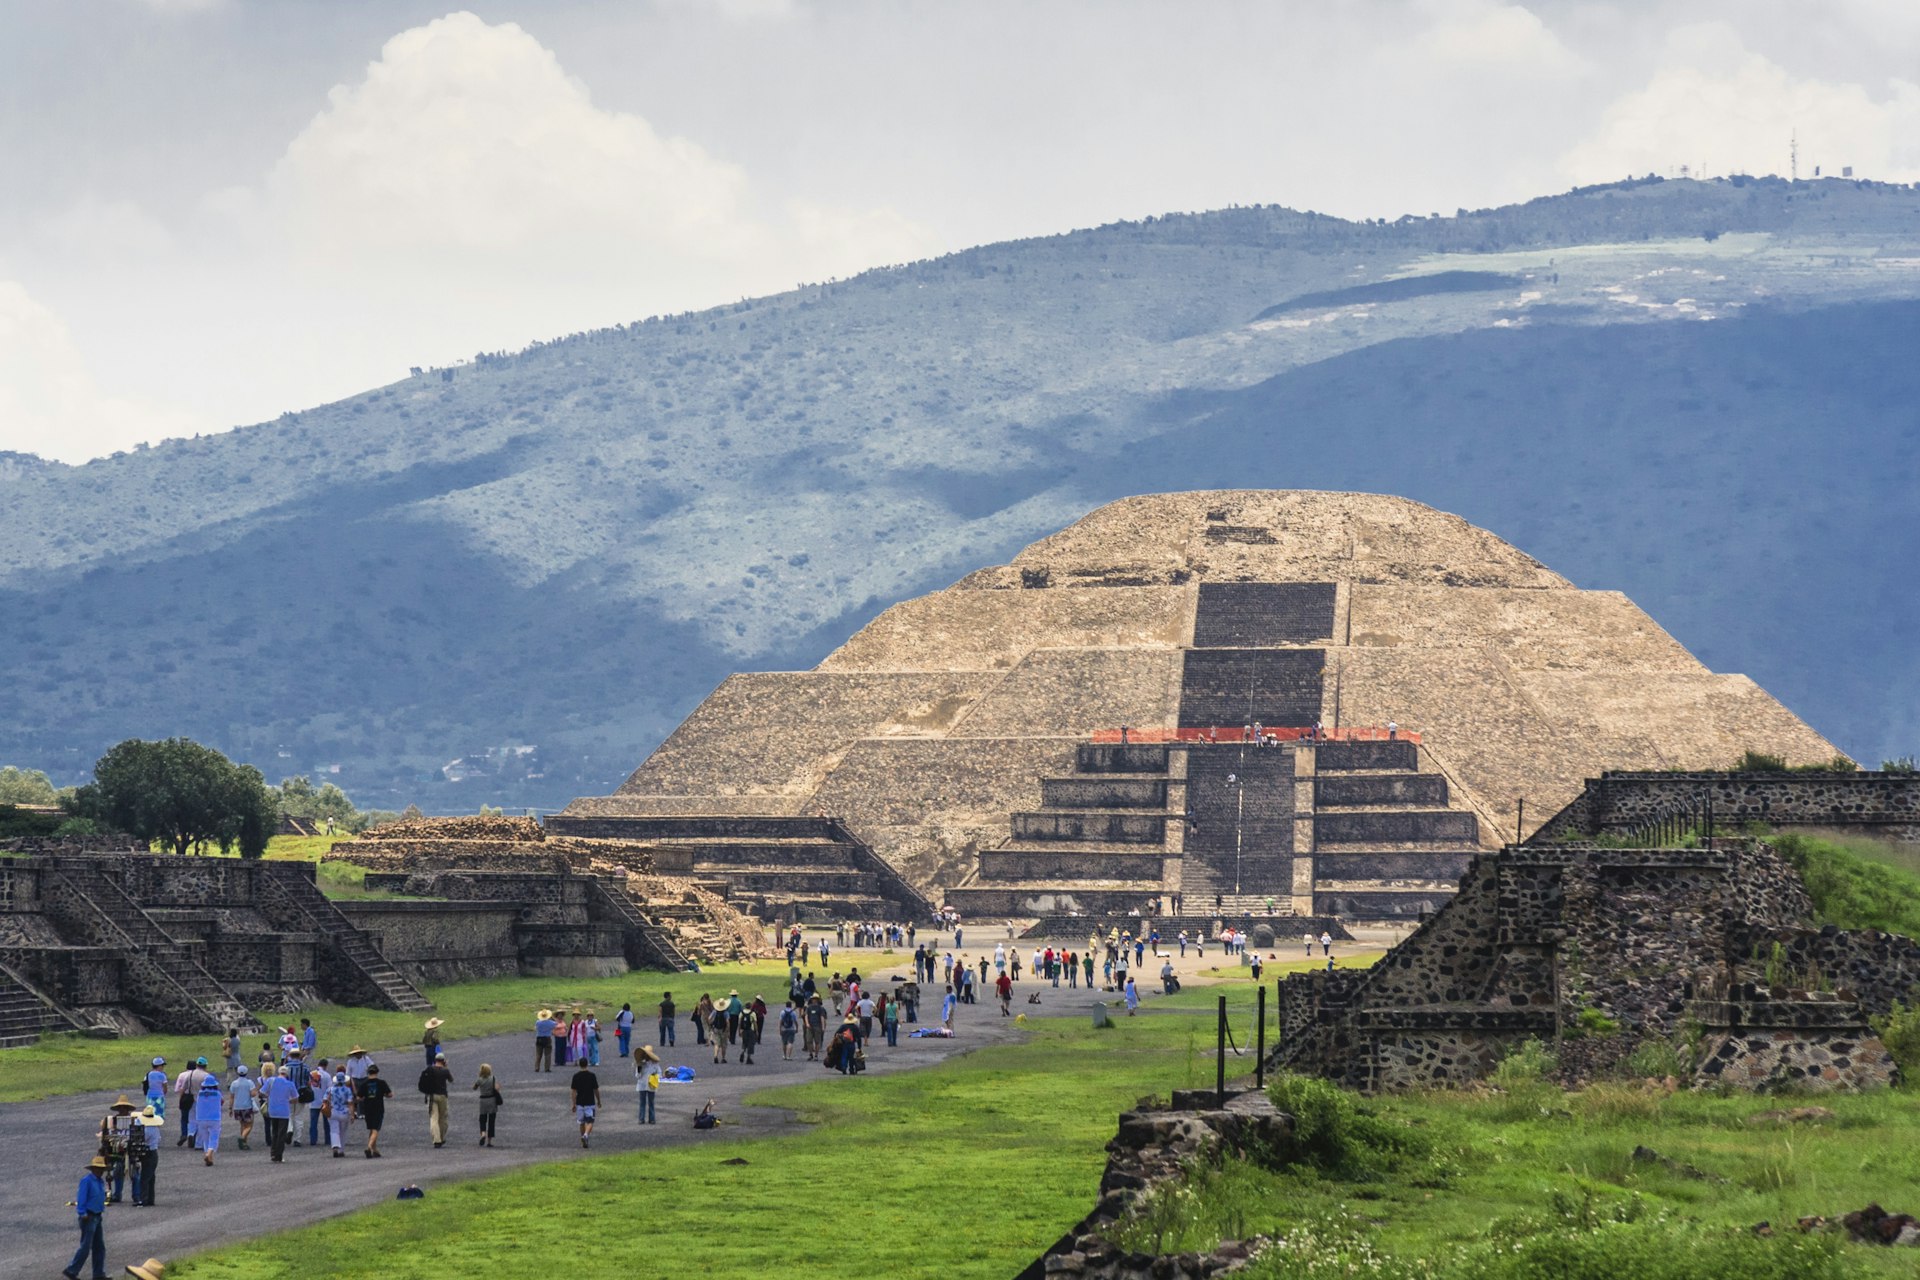 Tourists walk down an avenue leading to a large stone pyramid